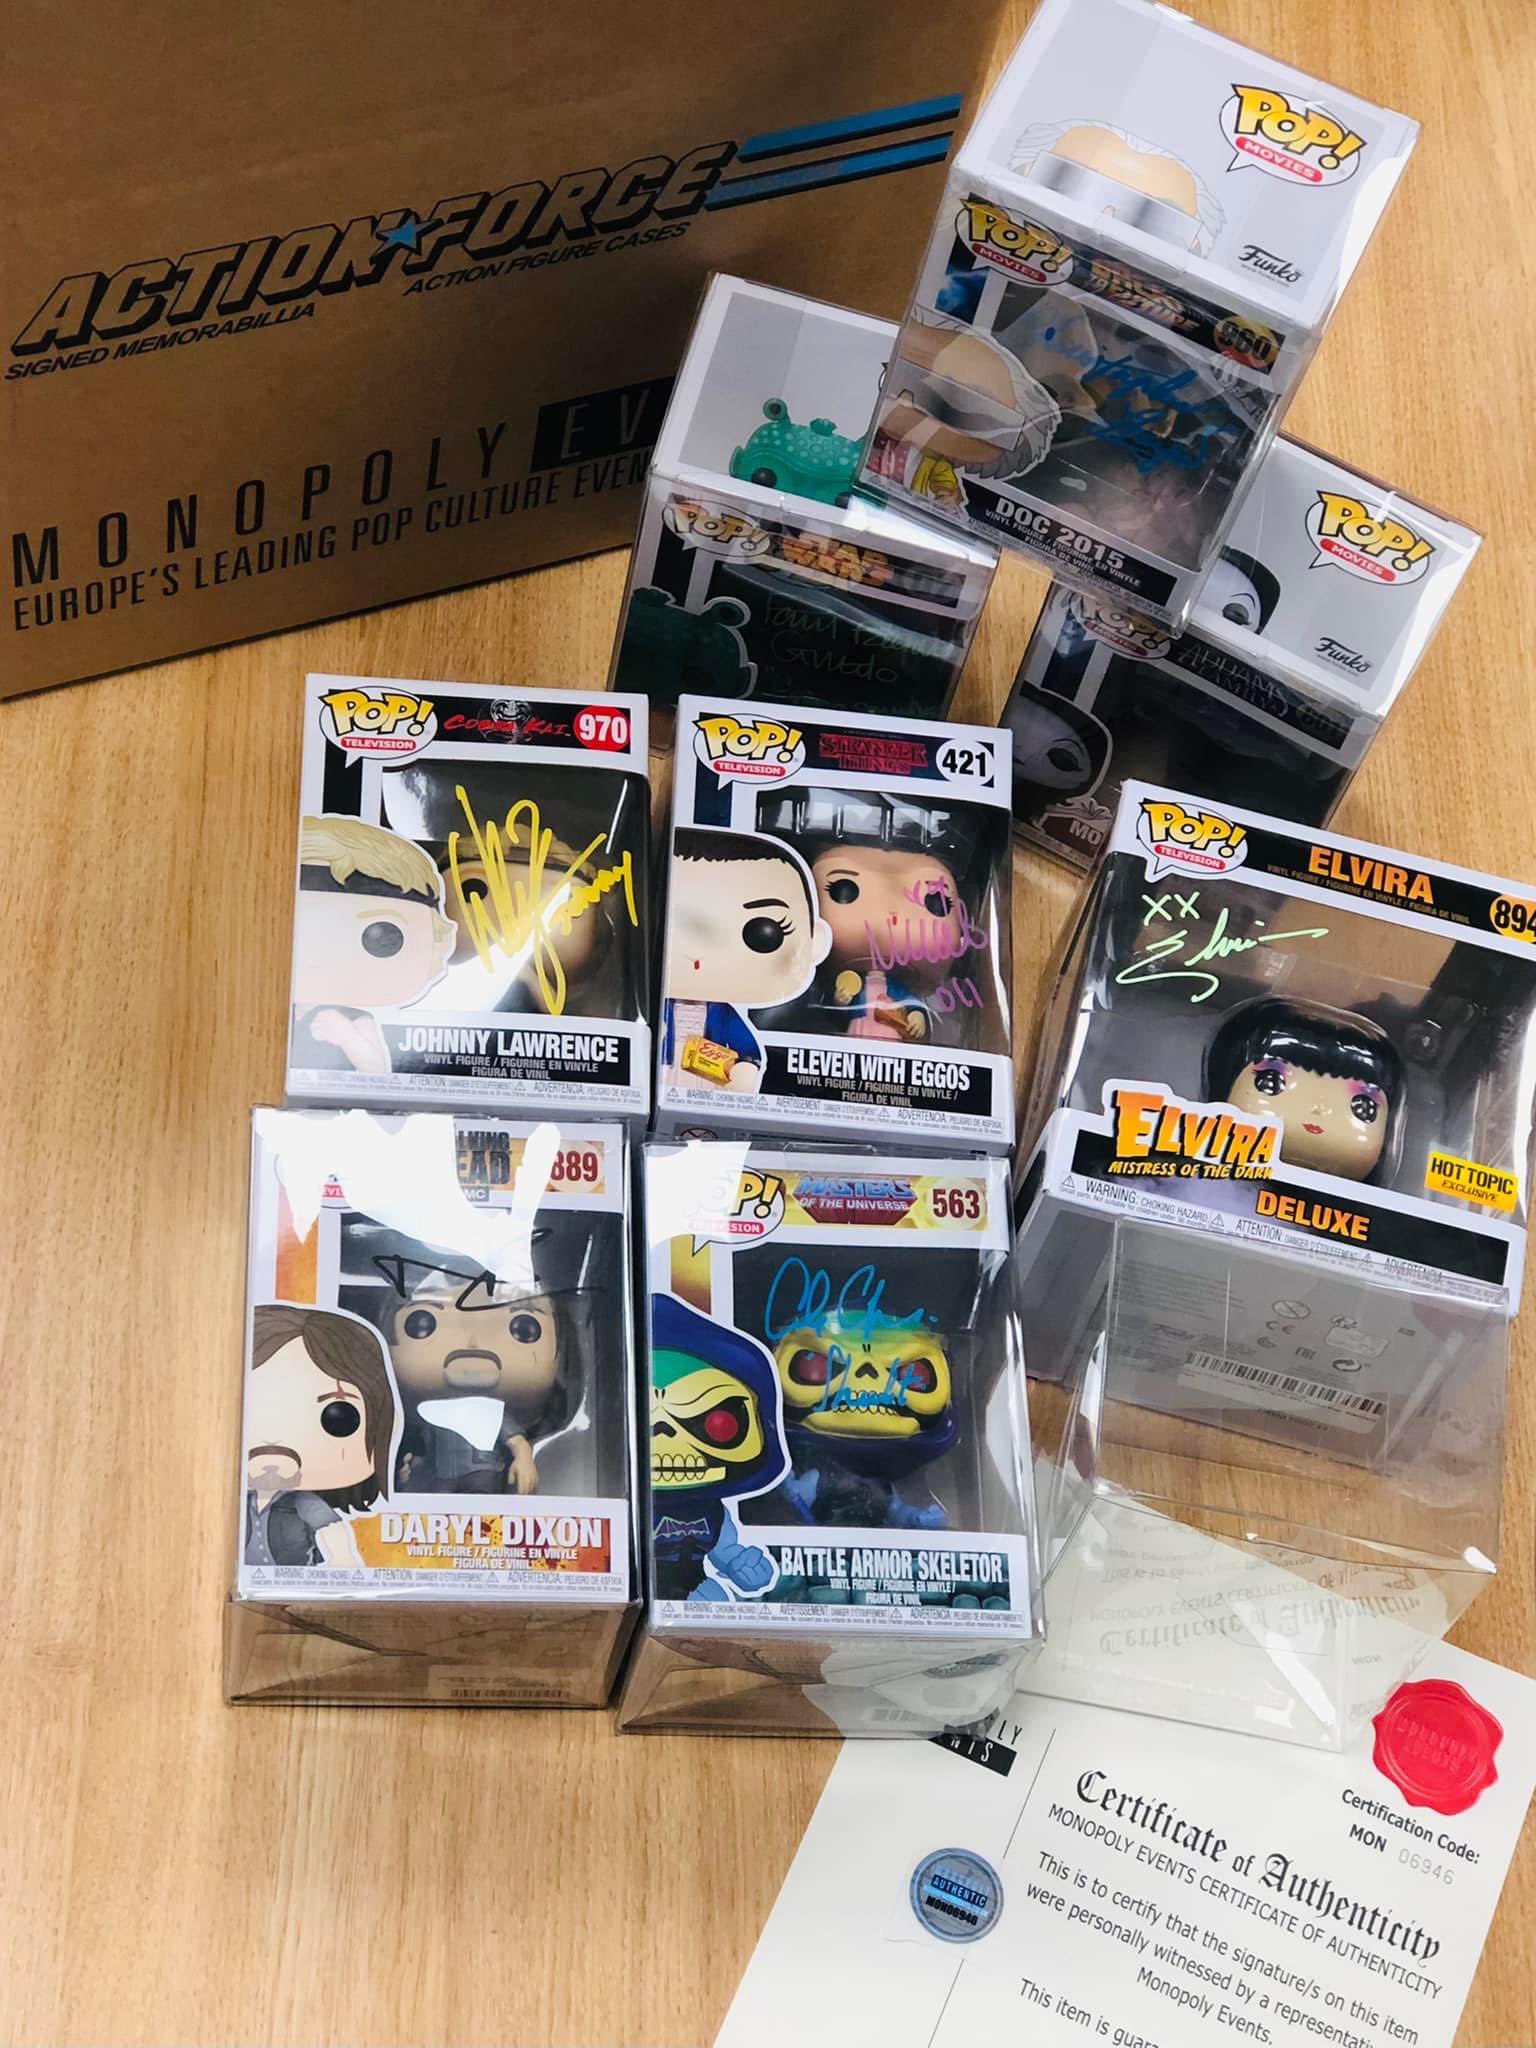 Nauwkeurig Klacht Meisje Comic Con Northern Ireland on Twitter: "📣 FUNKO POP DEAL📣 Buy Any 5 Funko  Pop's and get the 6th free (cheapest free) All funko pops can be viewed  online at https://t.co/dvhFrKJUiI Each